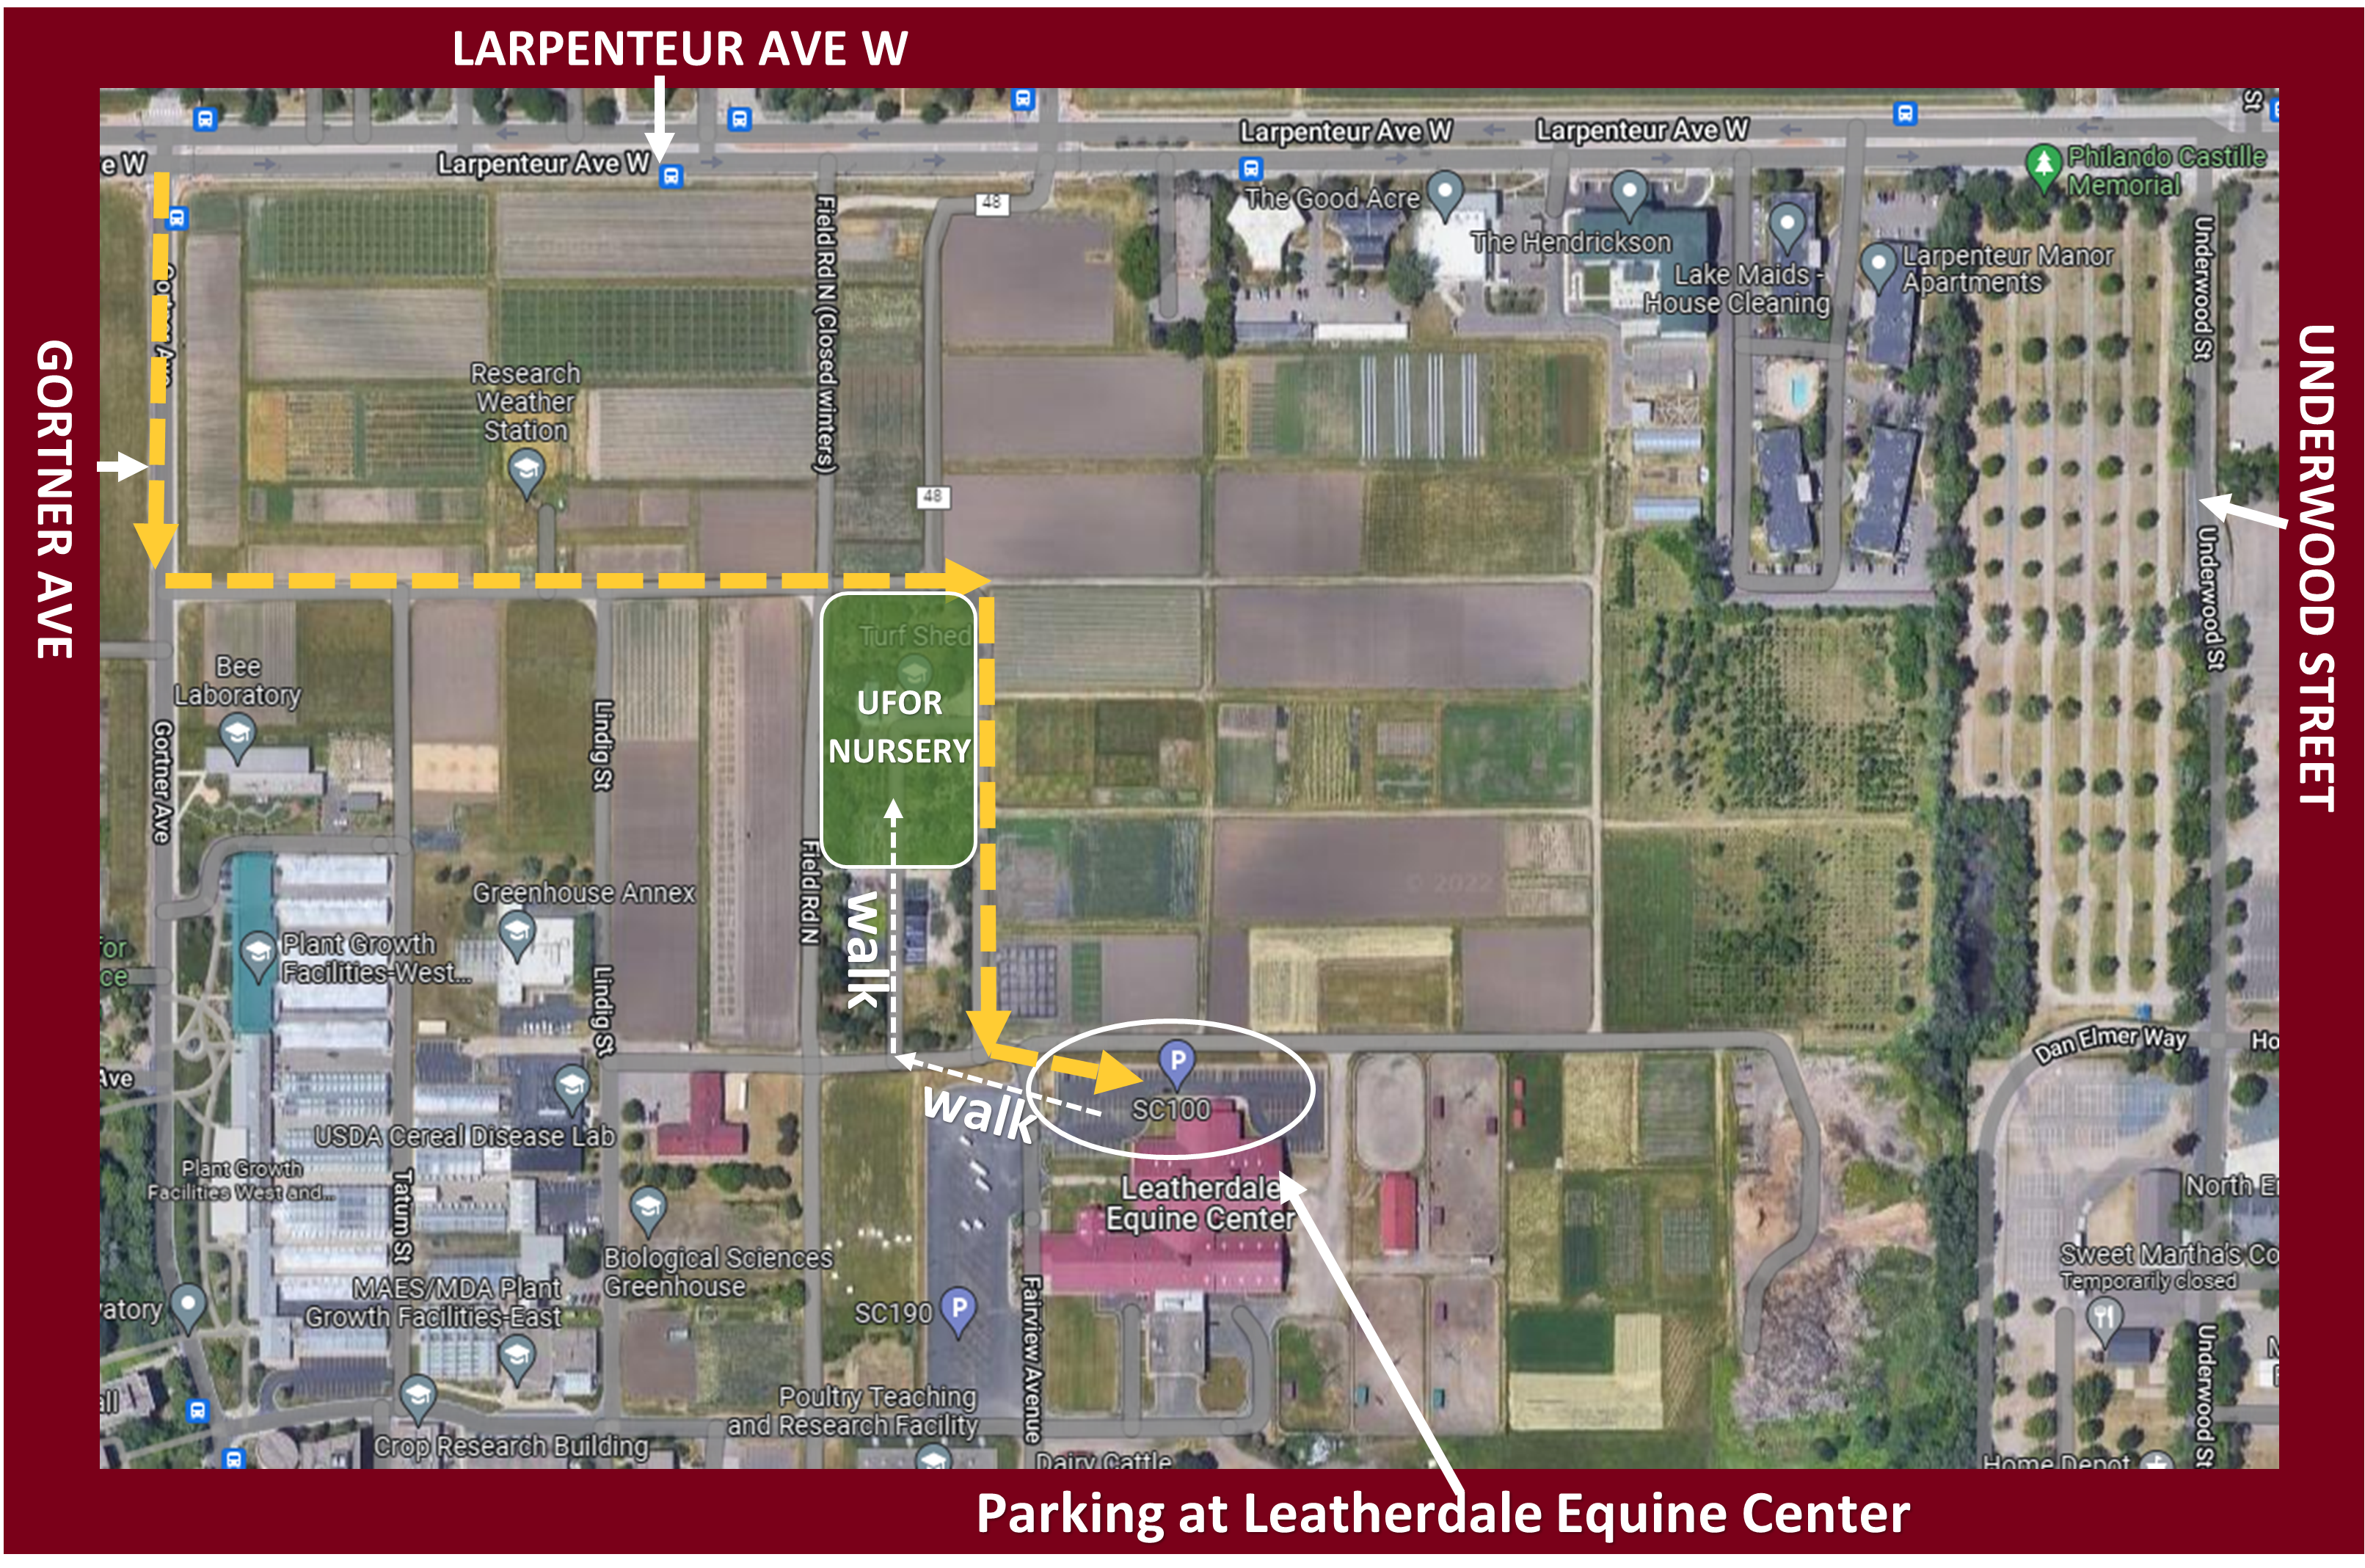 Parking location at Leatherdale Equine Center